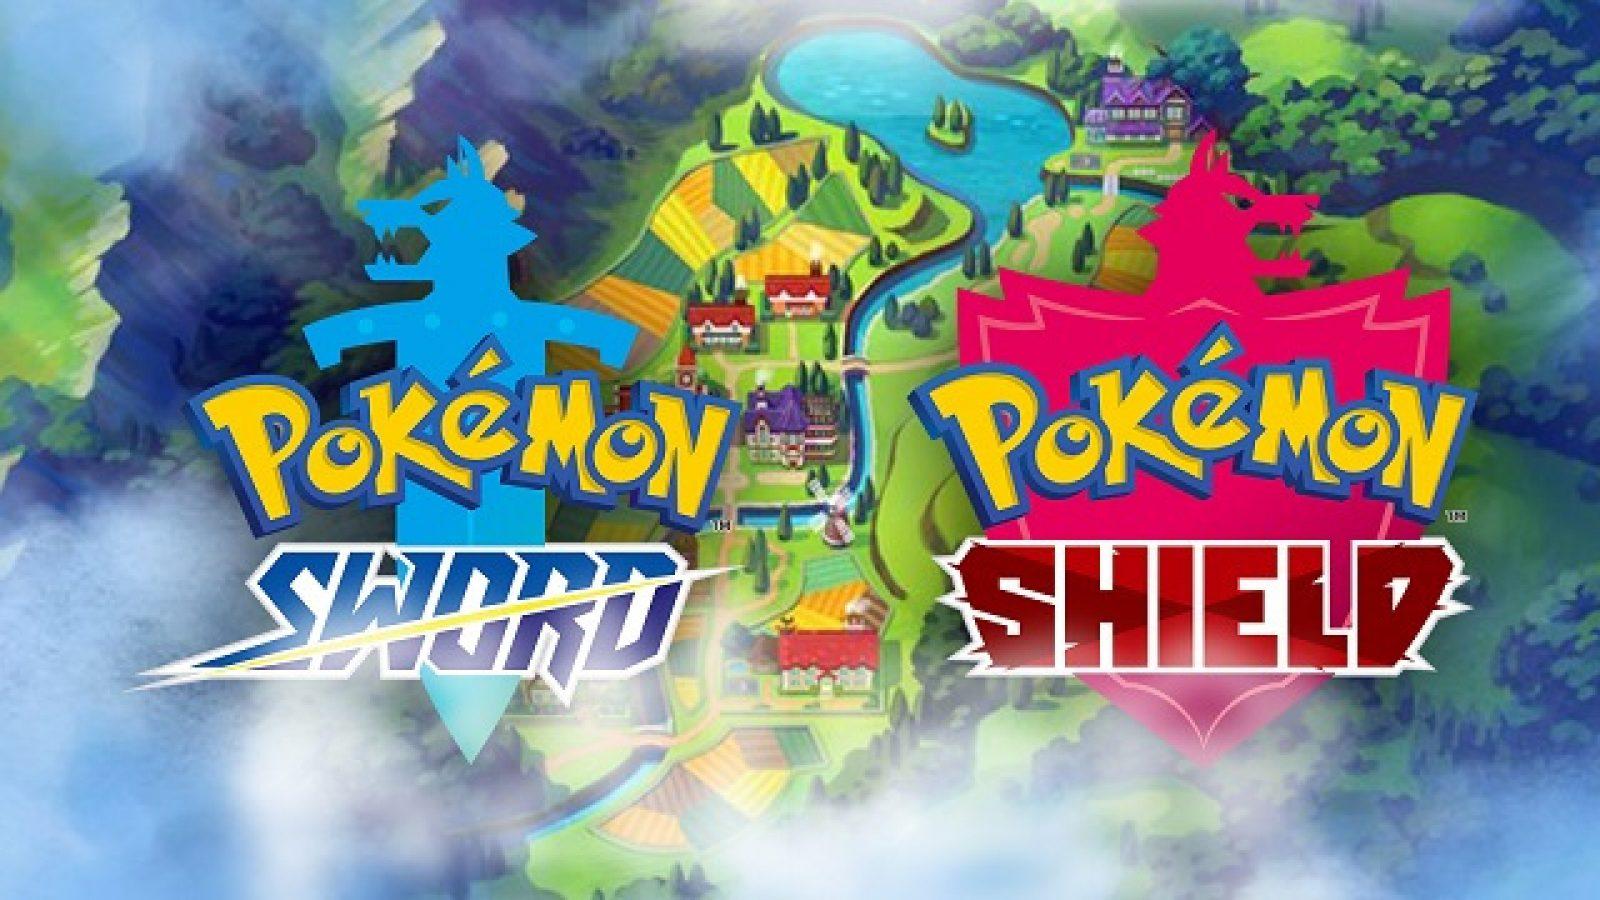 Will Pokemon Sword and Shield be open world?